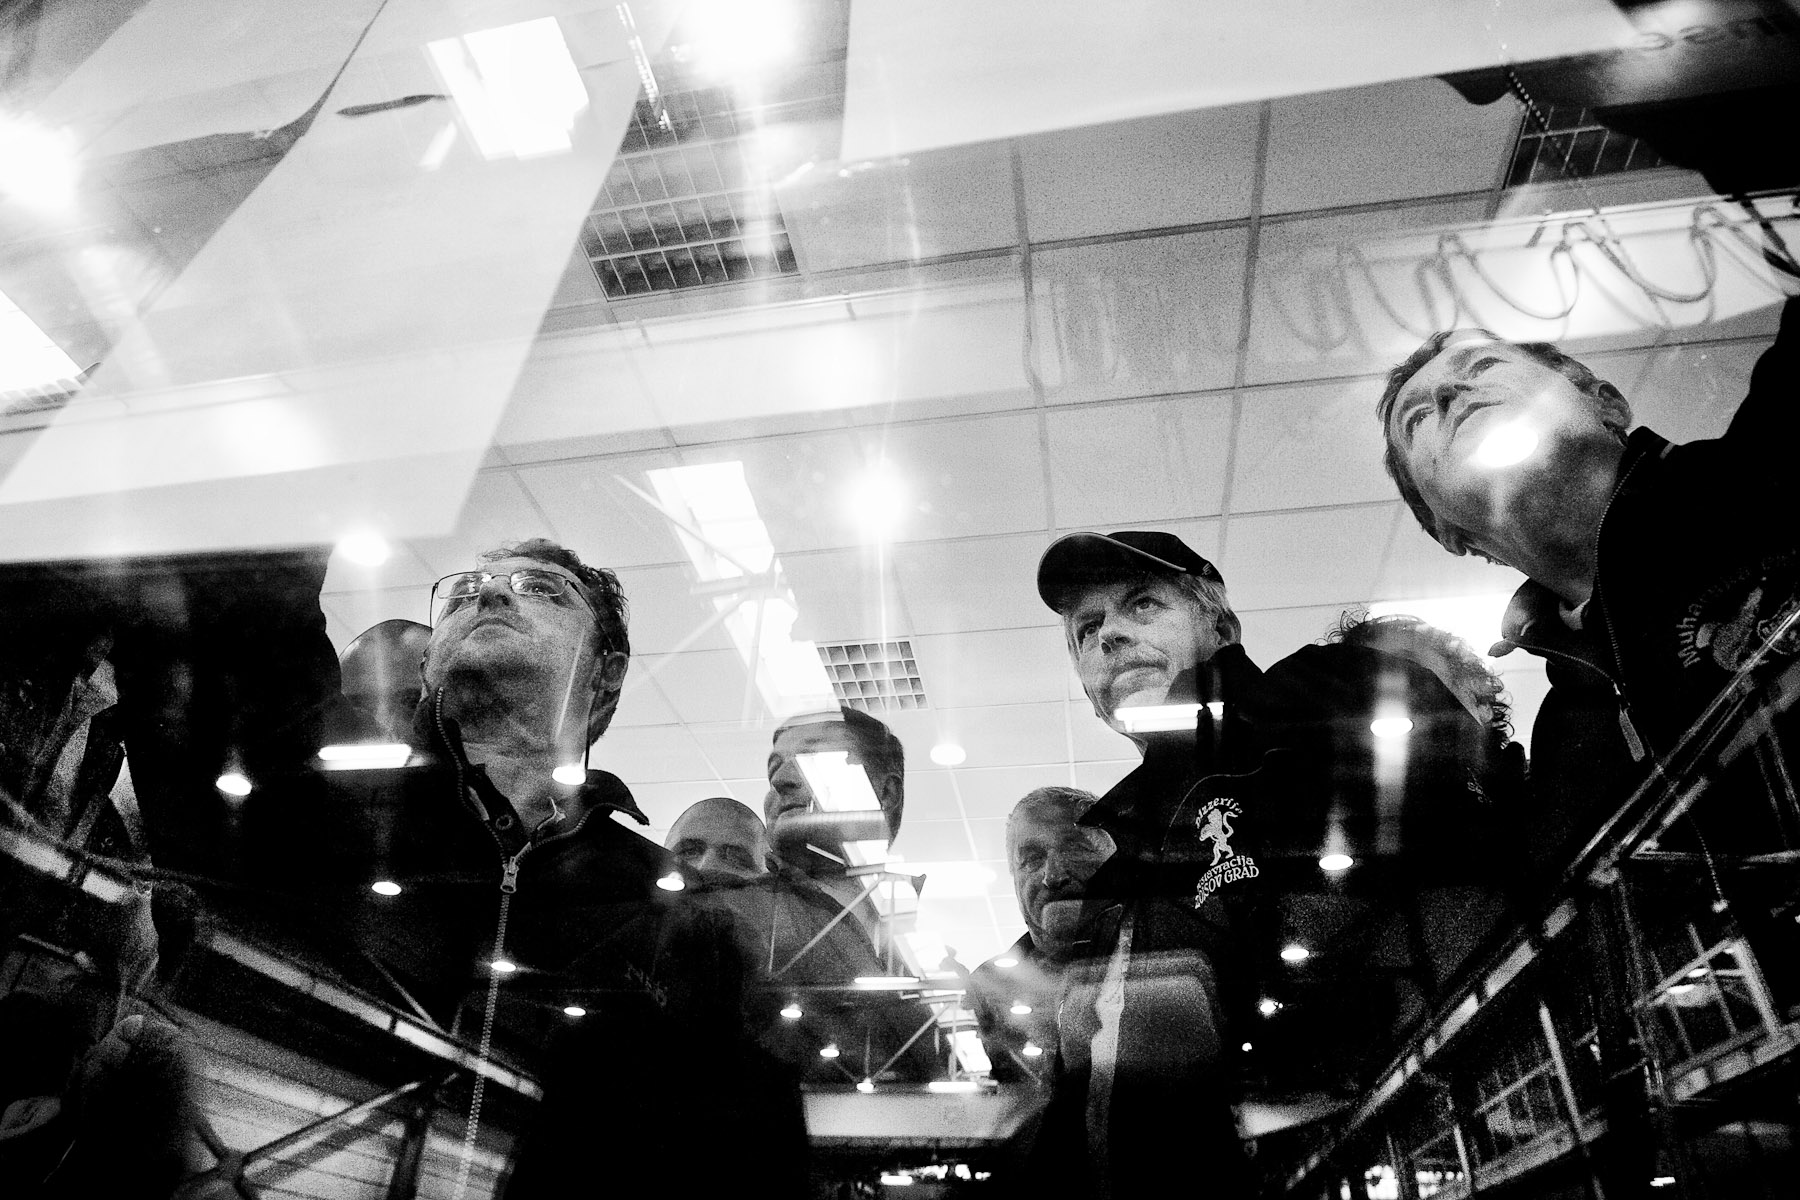 Competitors check their results on a window of a factory where the award ceremony of the National Fly Fishing Championship competition in Celje, Slovenia, took place in May 8, 2011.